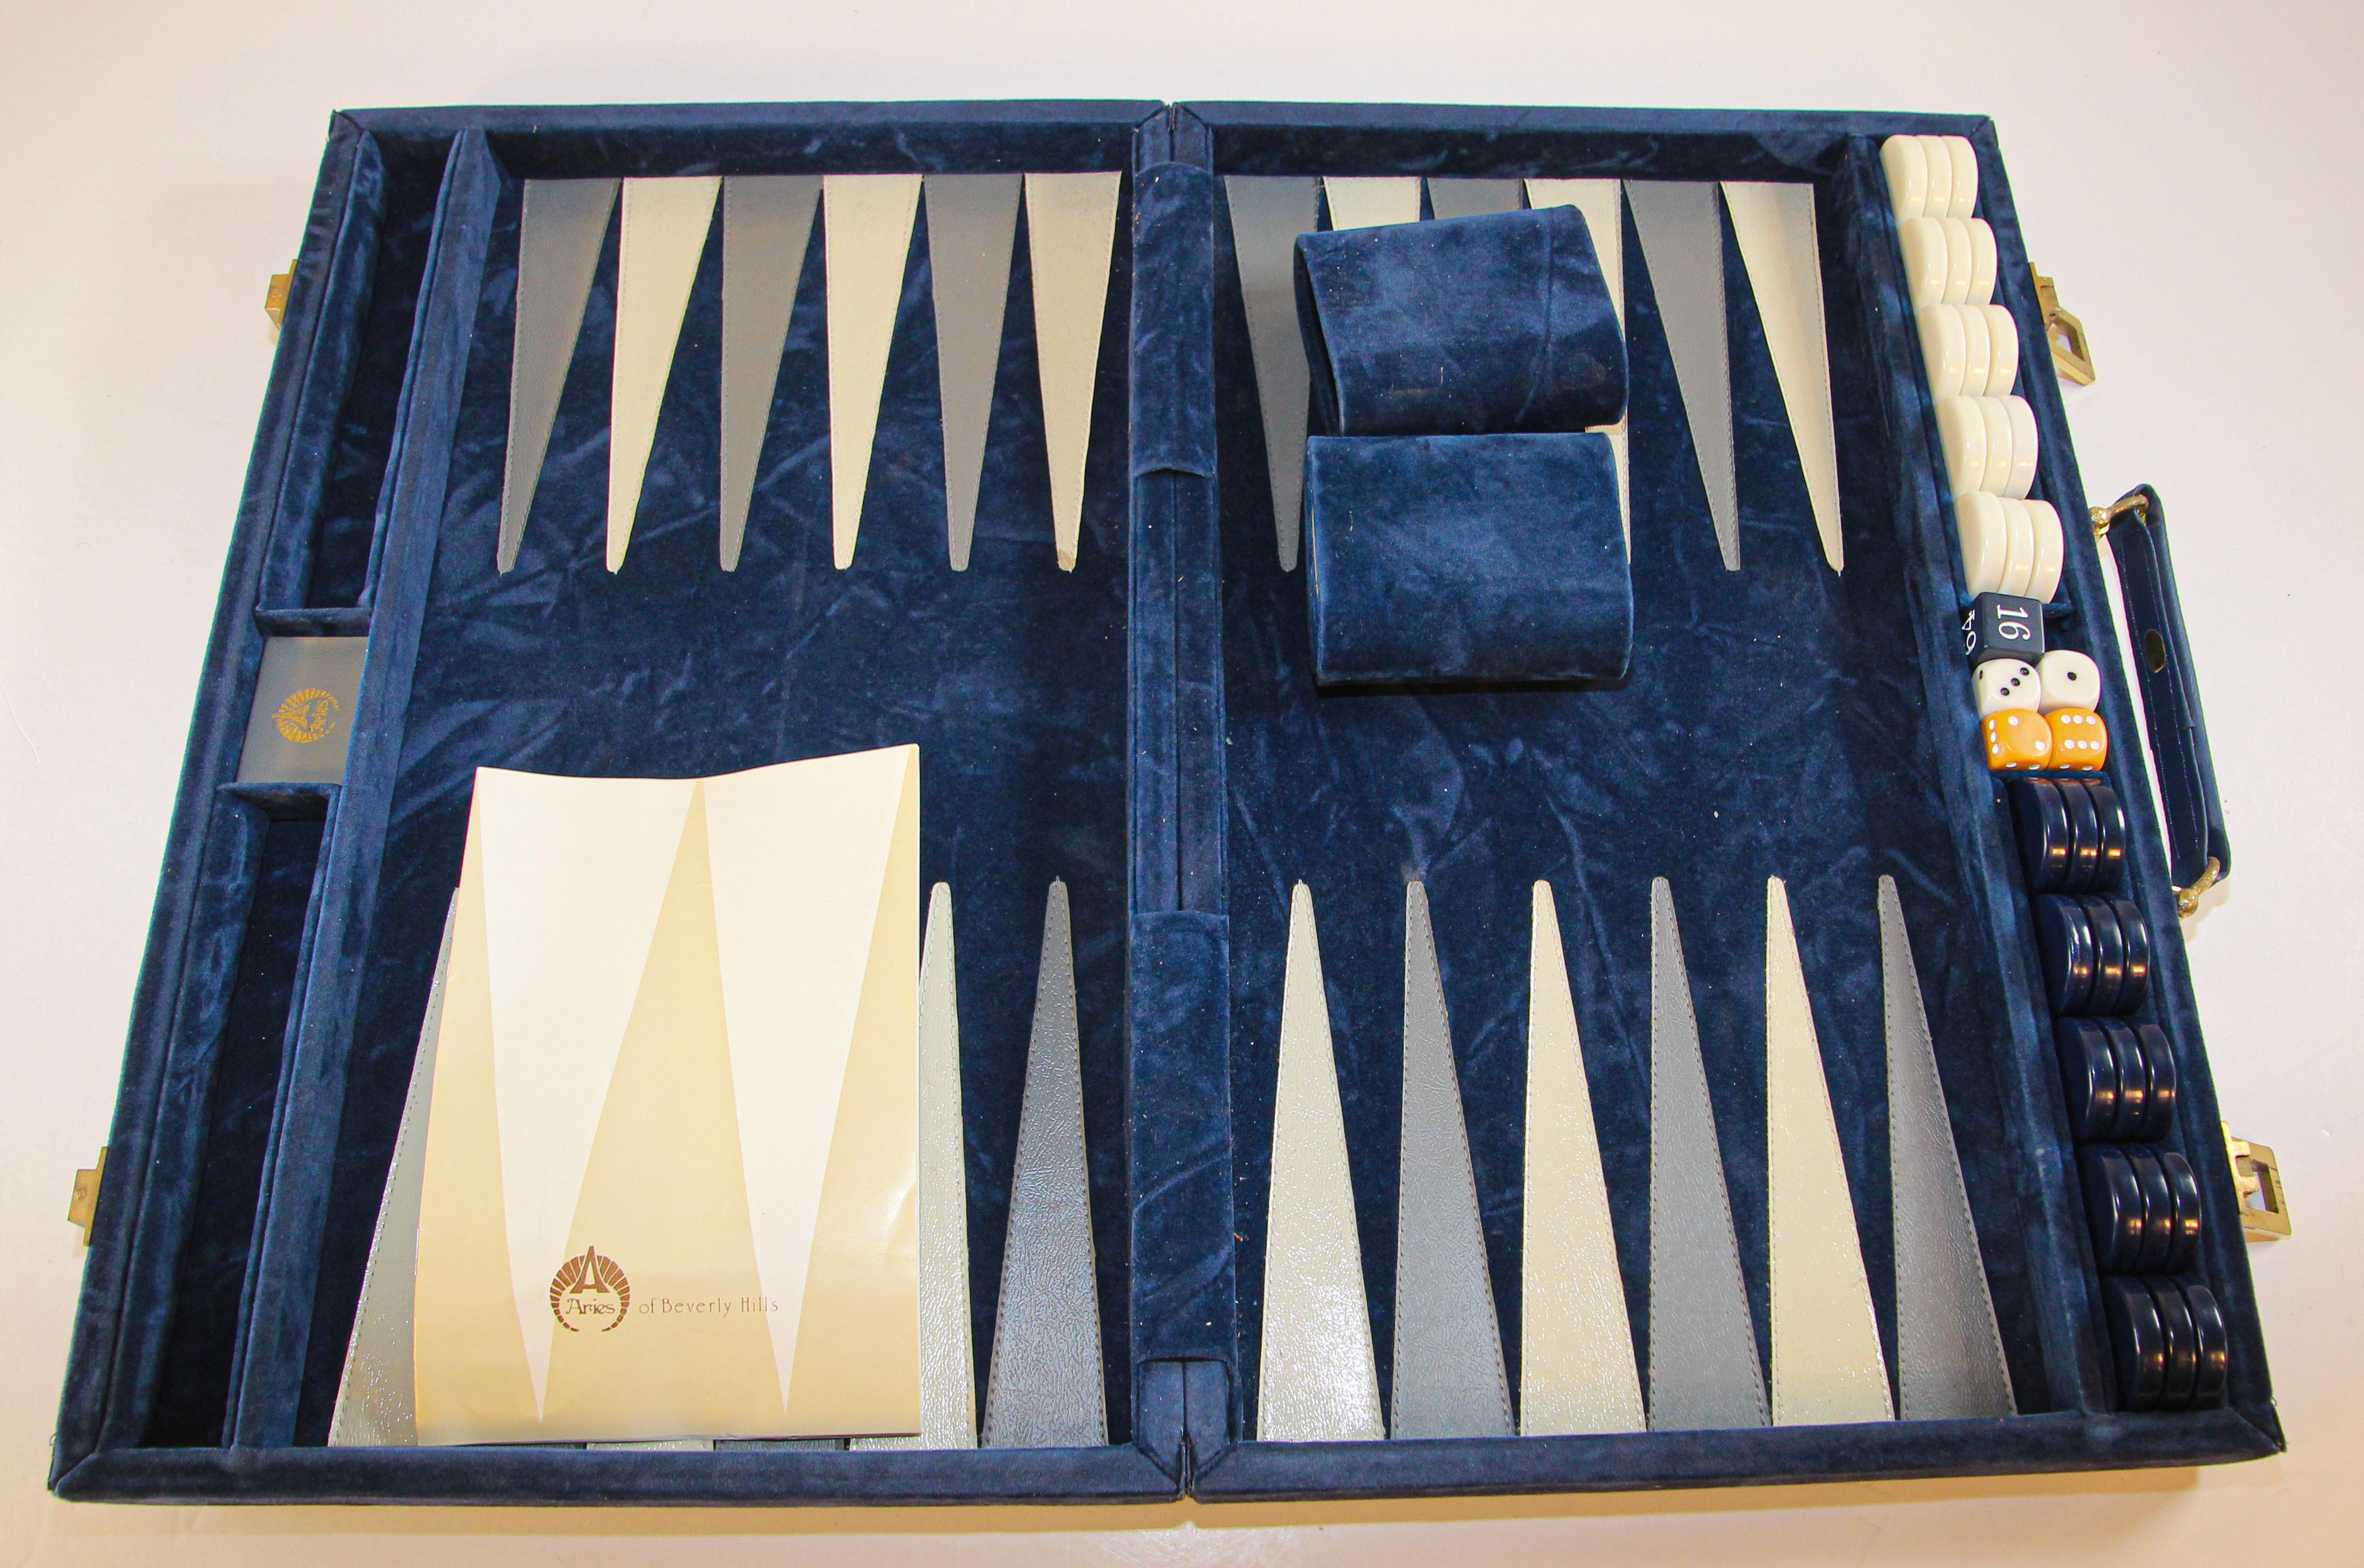 Vintage collector Aries Backgammon set in a briefcase blue velvet fabric 1970s.
This is an exclusive Aries of Beverly Hills Backgammon professional set crafted in an exterior blue velvet fabric. It securely closes with two brass plated latches.The